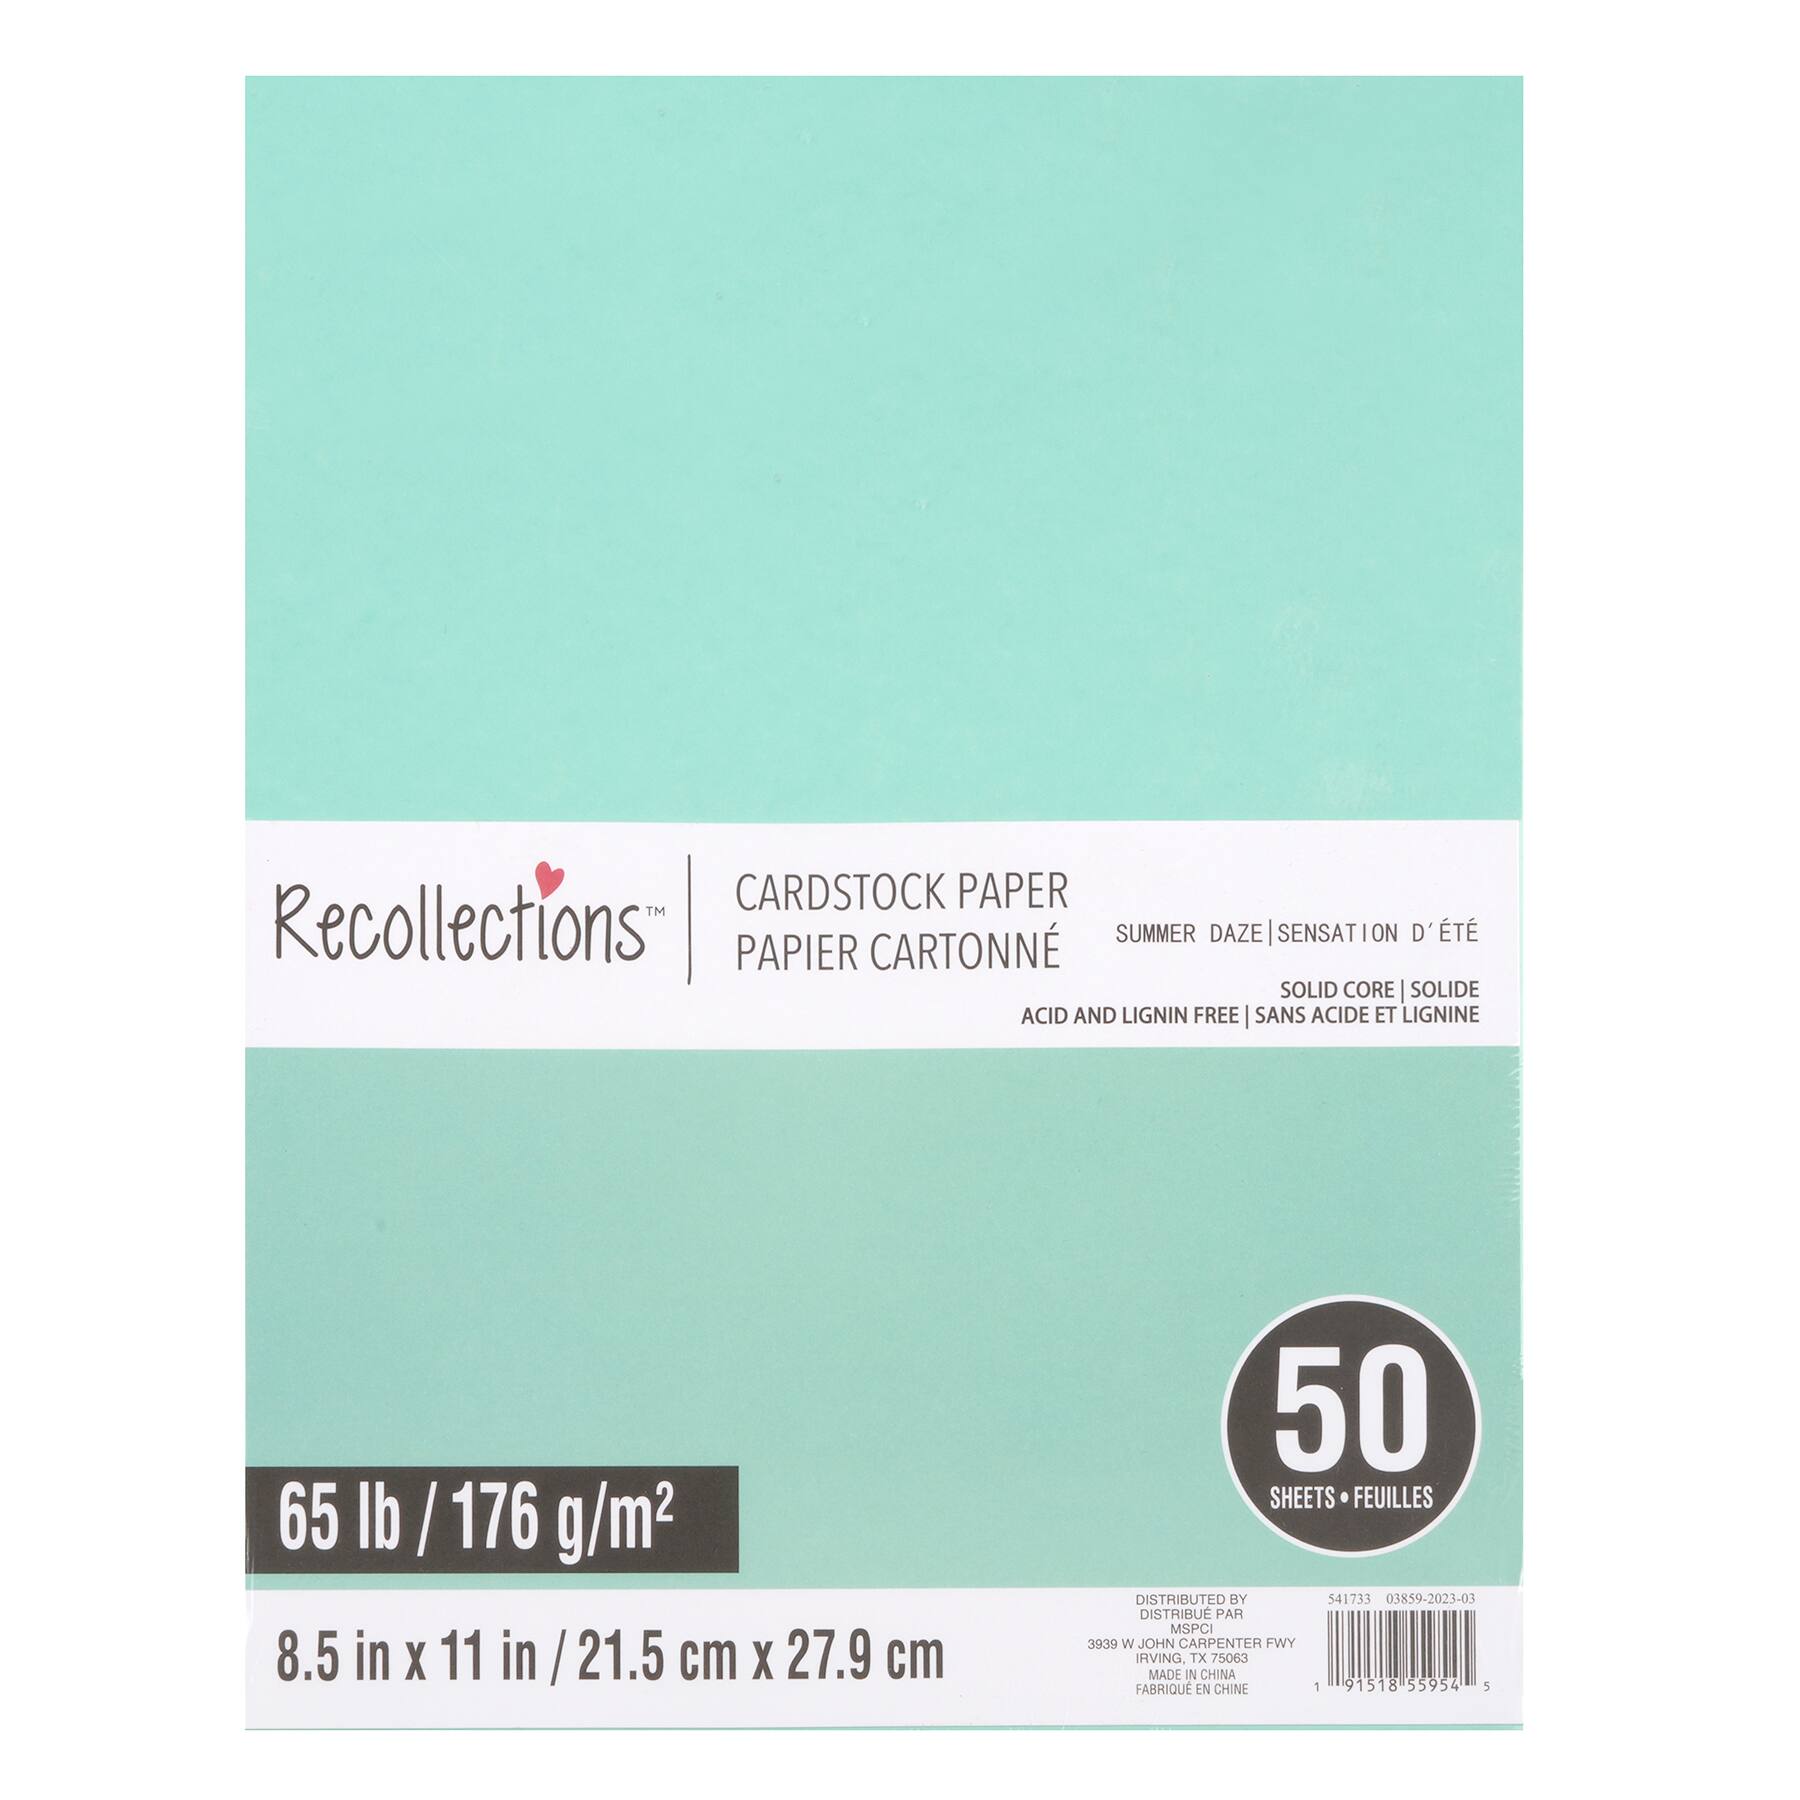 Recollections 8.5 x 11 Shades of Red Cardstock Paper - 50 ct